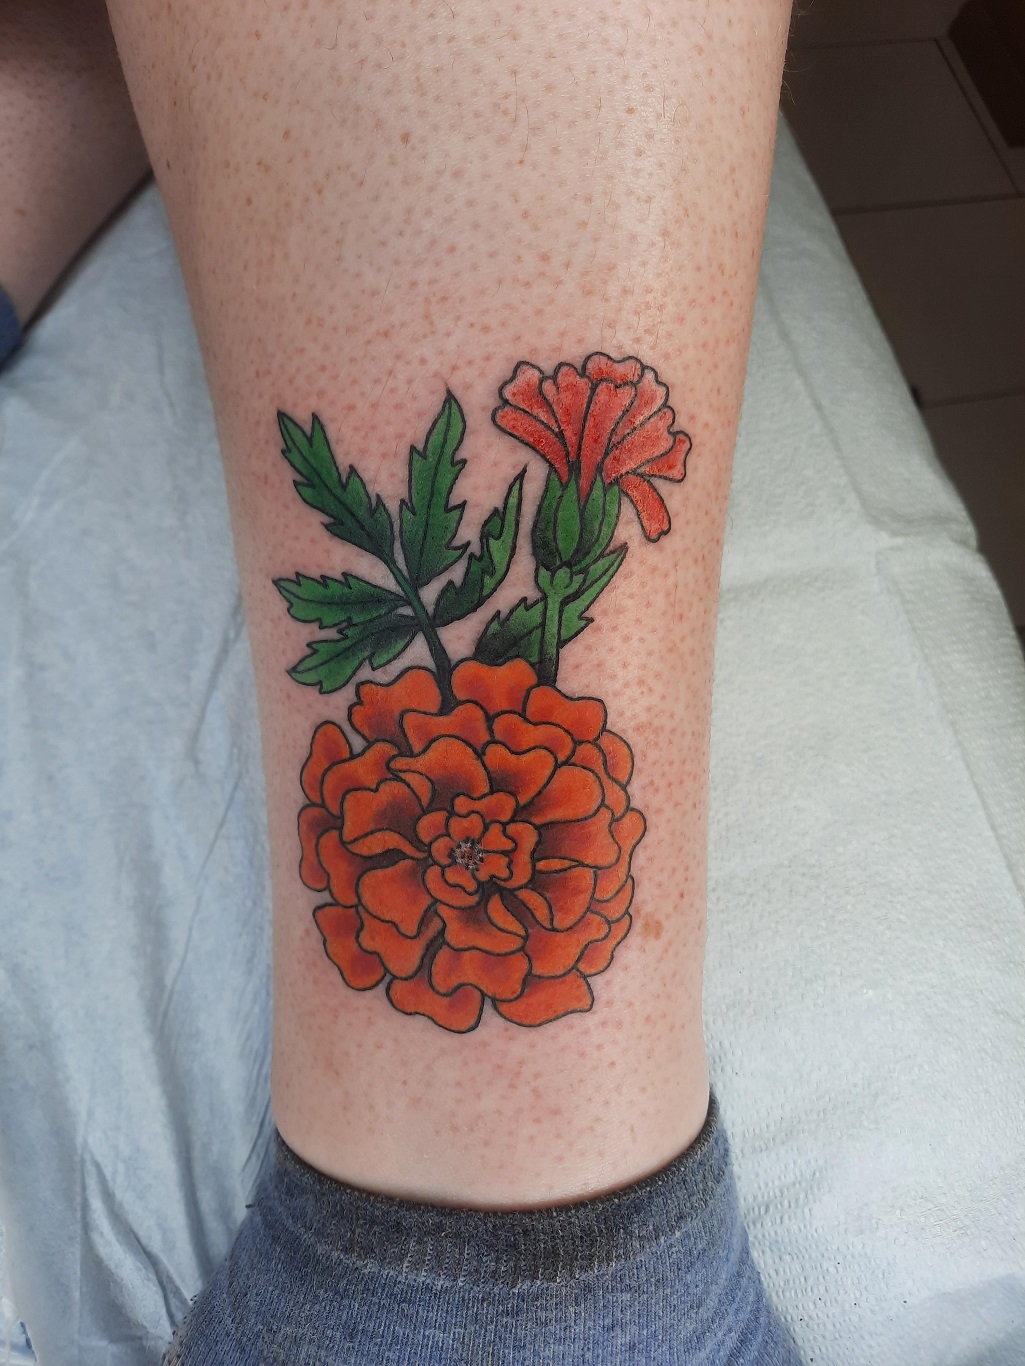 marigold tattoo  design ideas and meaning  WithTattocom